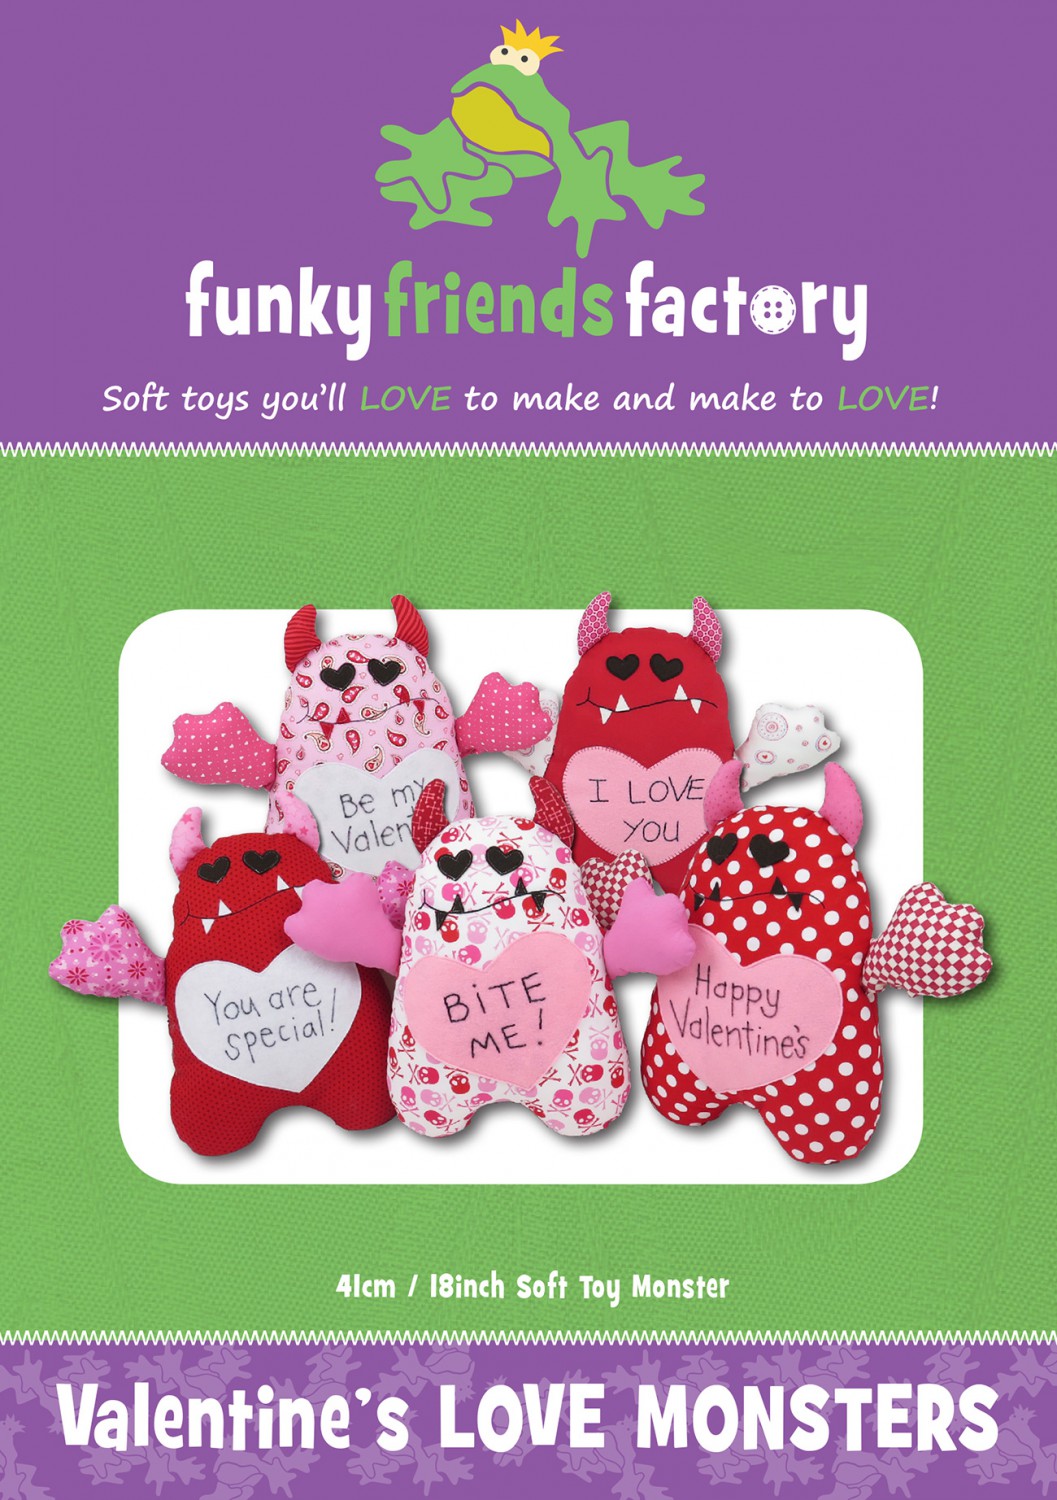 The Newest Additions to Funky Friends | Checker News Blog